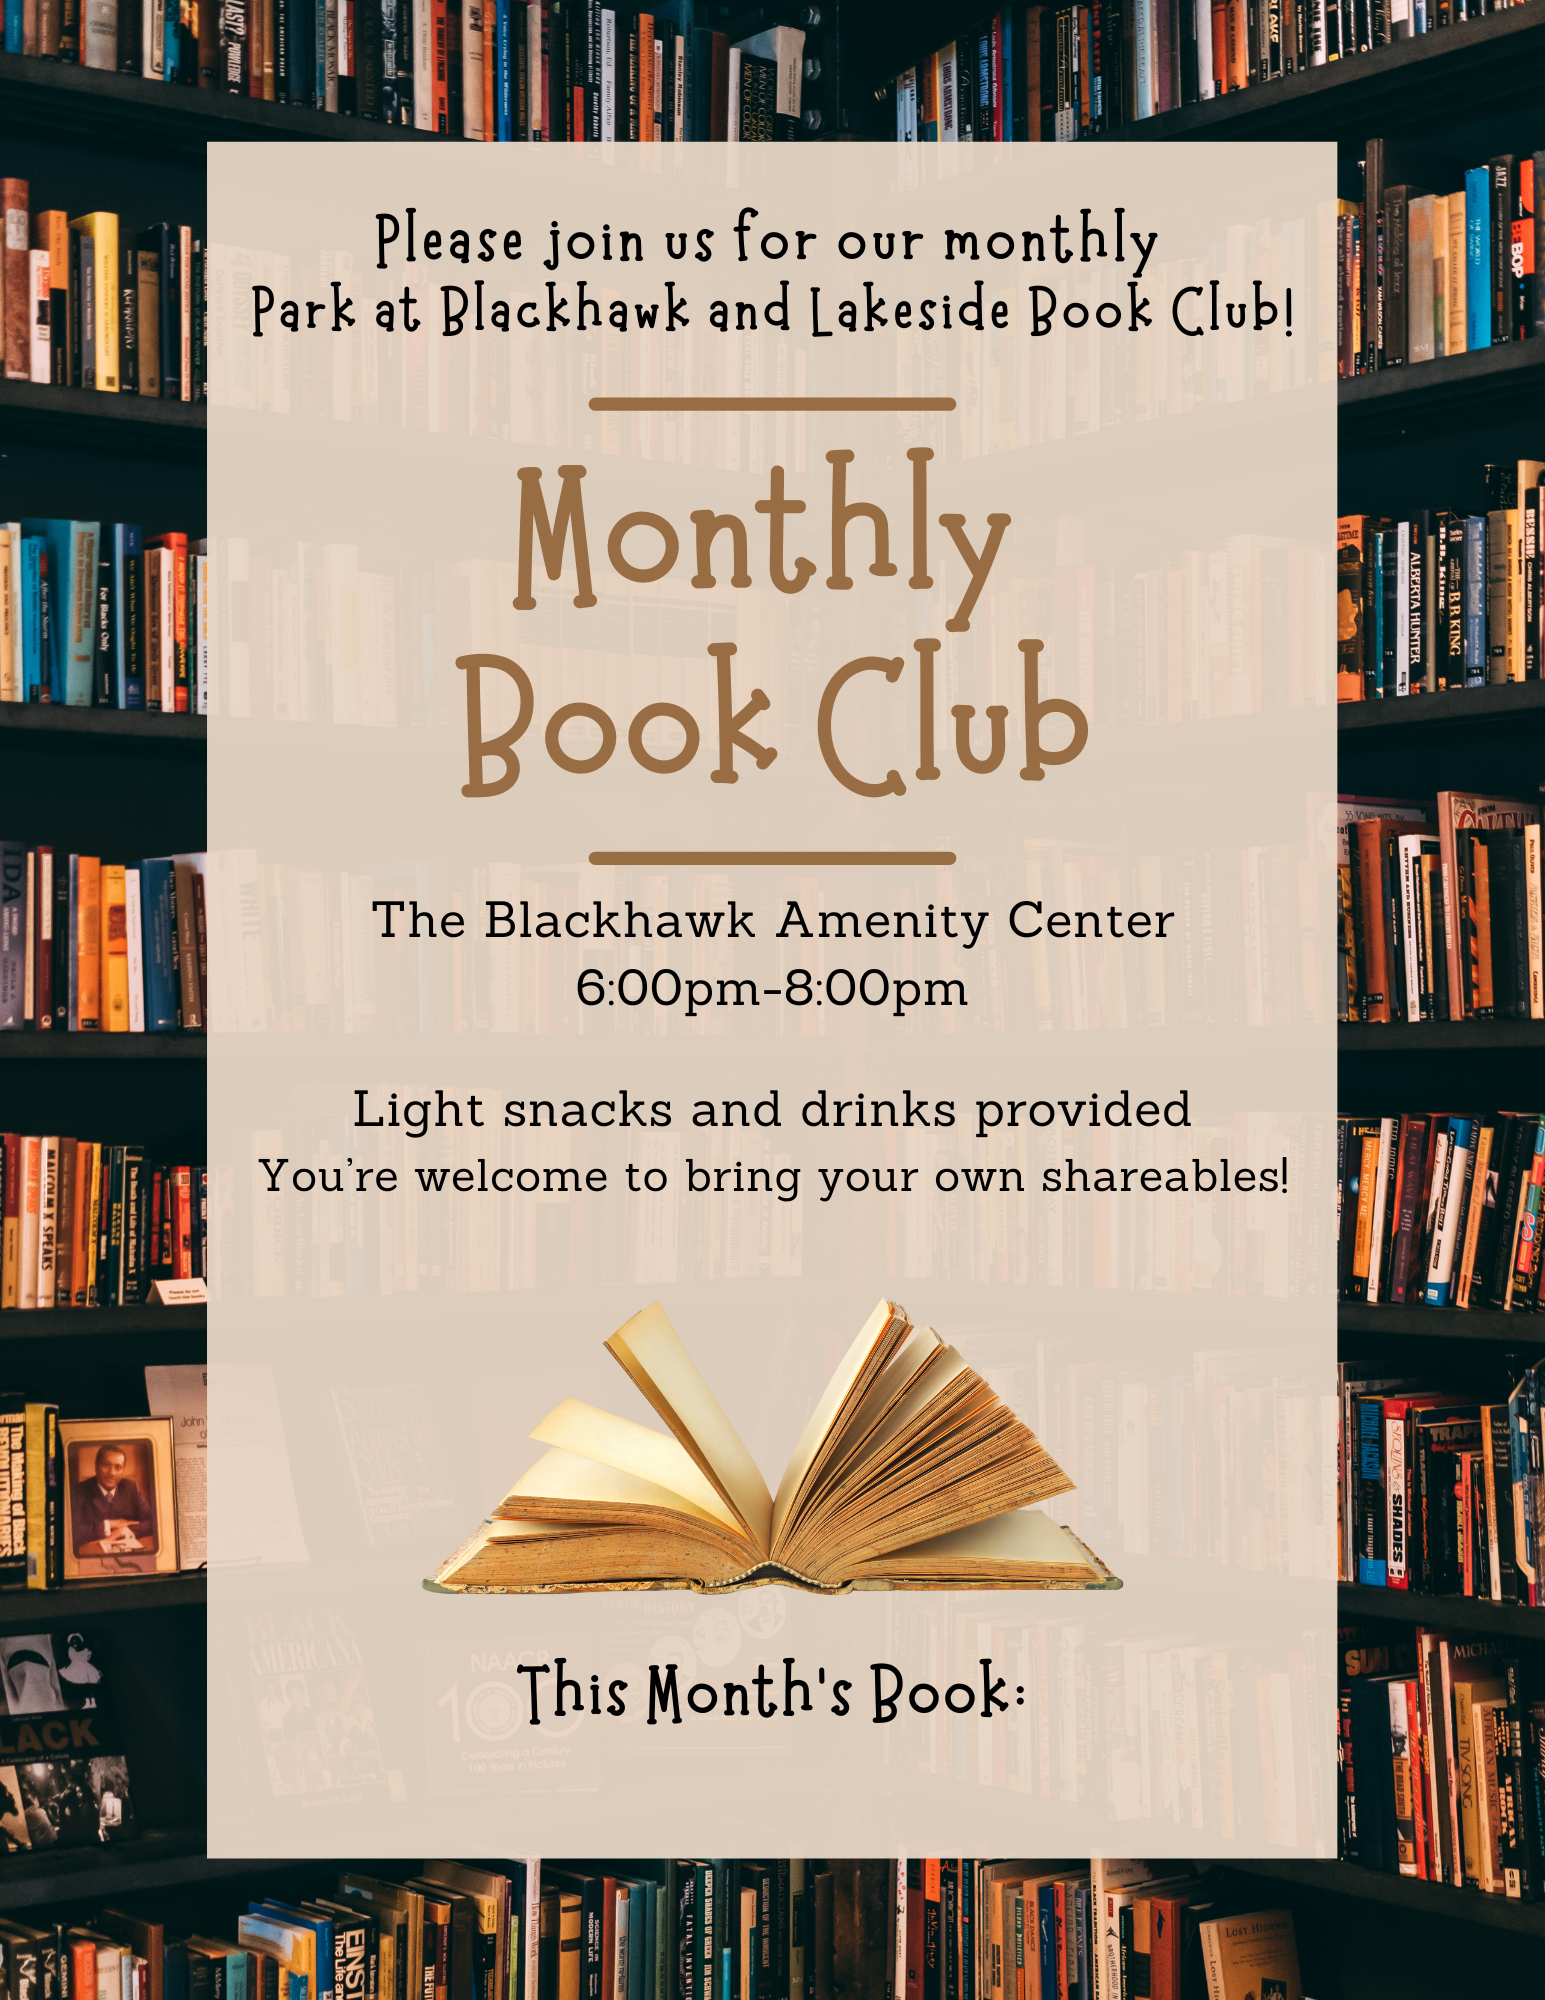 Flyer for a monthly book club meeting at the Blackhawk and Lakeside Book Club. The background features a blurred image of bookshelves filled with various books. At the top, it invites people to join the club with the words 'Please join us for our monthly Park at Blackhawk and Lakeside Book Club!' Below is the title 'Monthly Book Club' in stylized text. The meeting details include 'The Blackhawk Amenity Center 6:00pm-8:00pm' with a note that light snacks and drinks are provided and attendees are welcome to bring their own shareables. In the center of the flyer is an image of an open book with the text 'This Month's Book:'